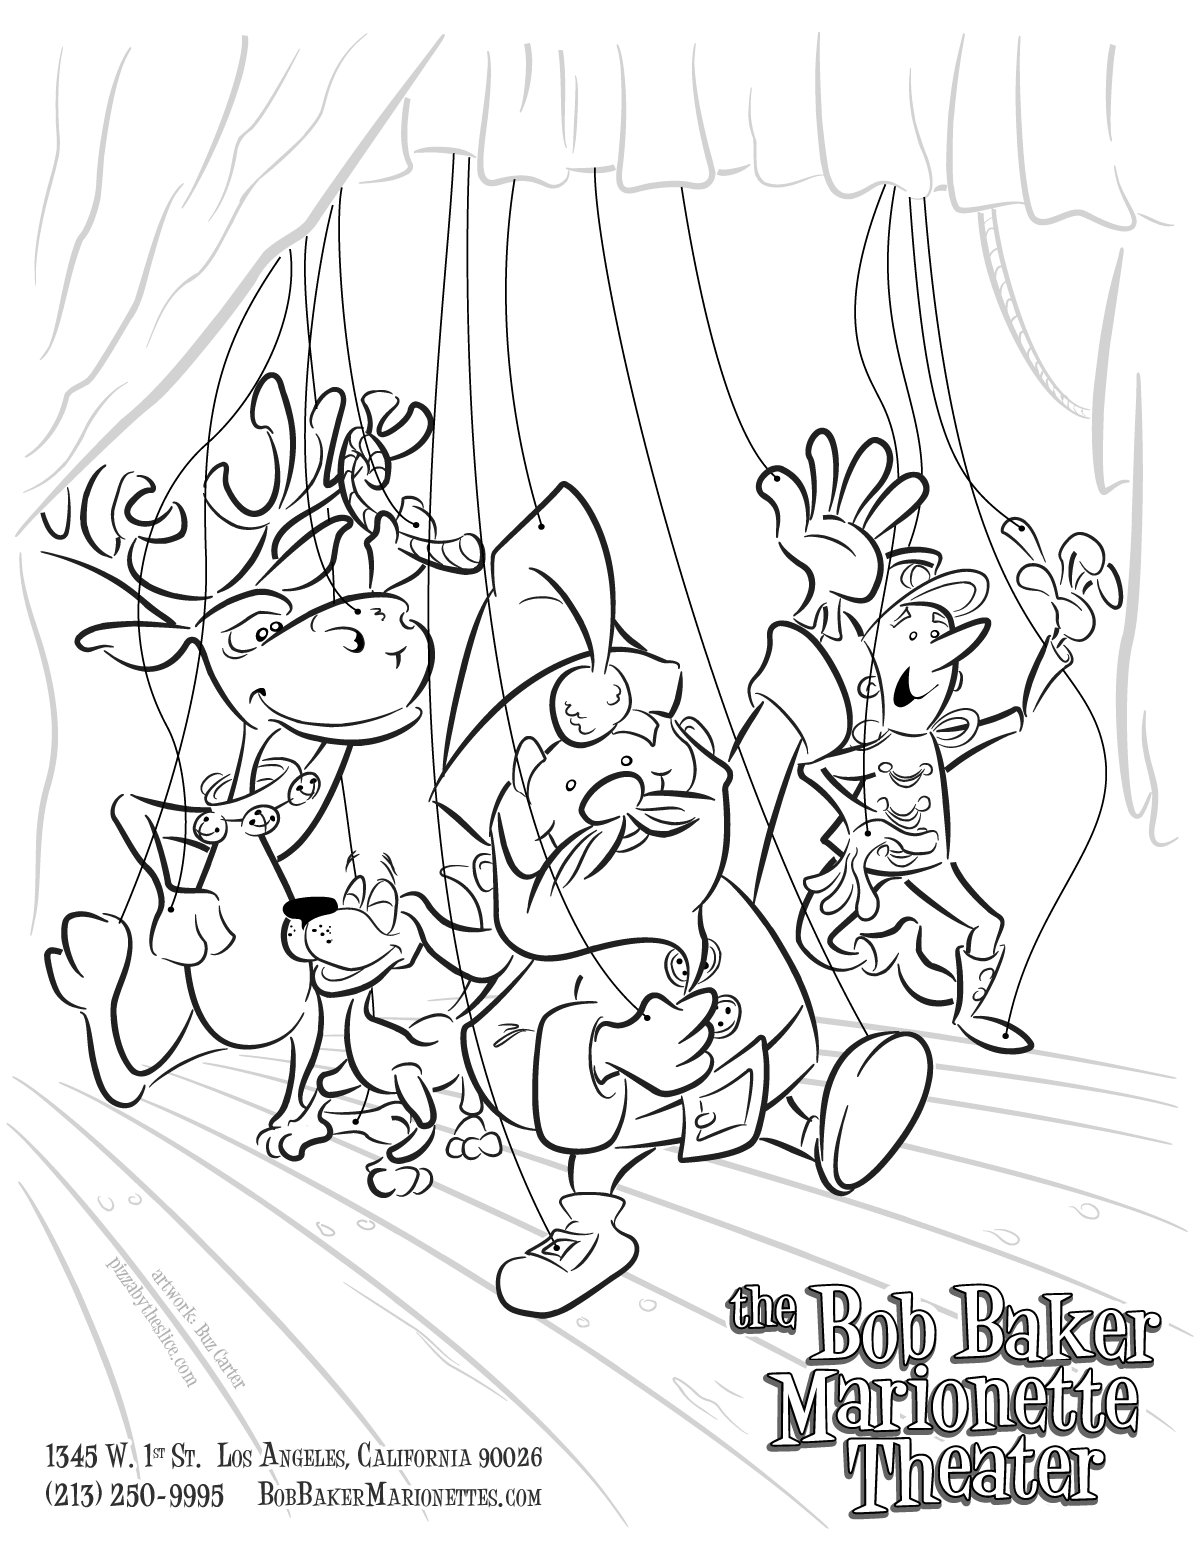 Bob Baker Marionette Theater Christmas Coloring Book Page